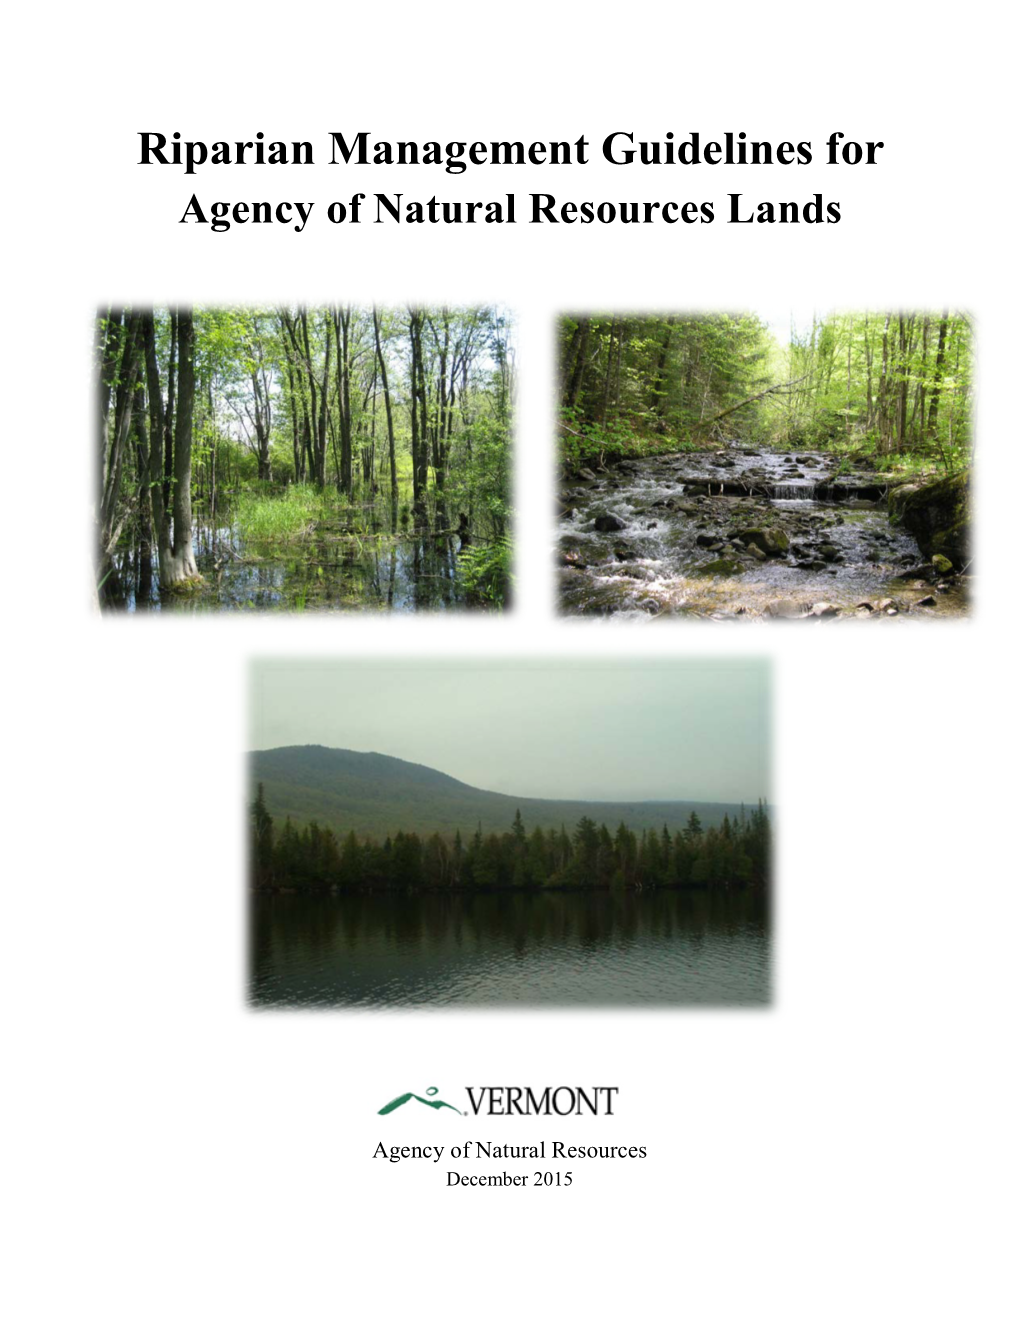 Riparian Management Guidelines for ANR Lands